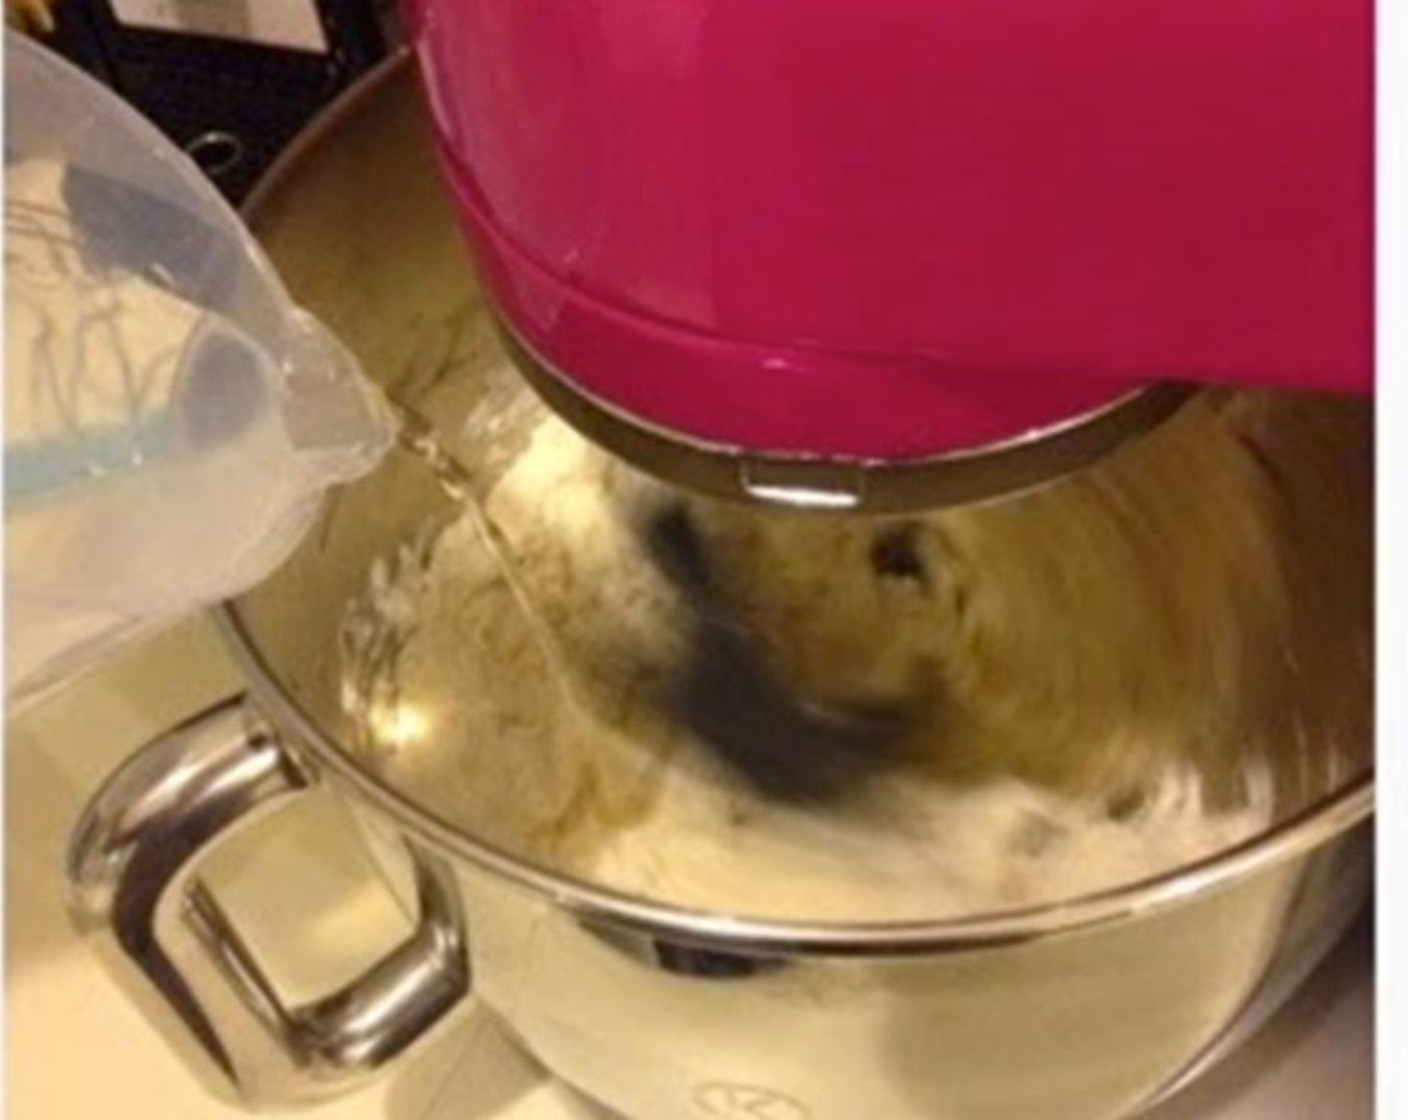 step 2 If you are using a stand mixer, start on low speed and slowly add in the Water (1 1/2 cups). If using a spatula to mix it. Mix for about 1 minute or until it forms a sticky dough and no more dry flour can be seen.